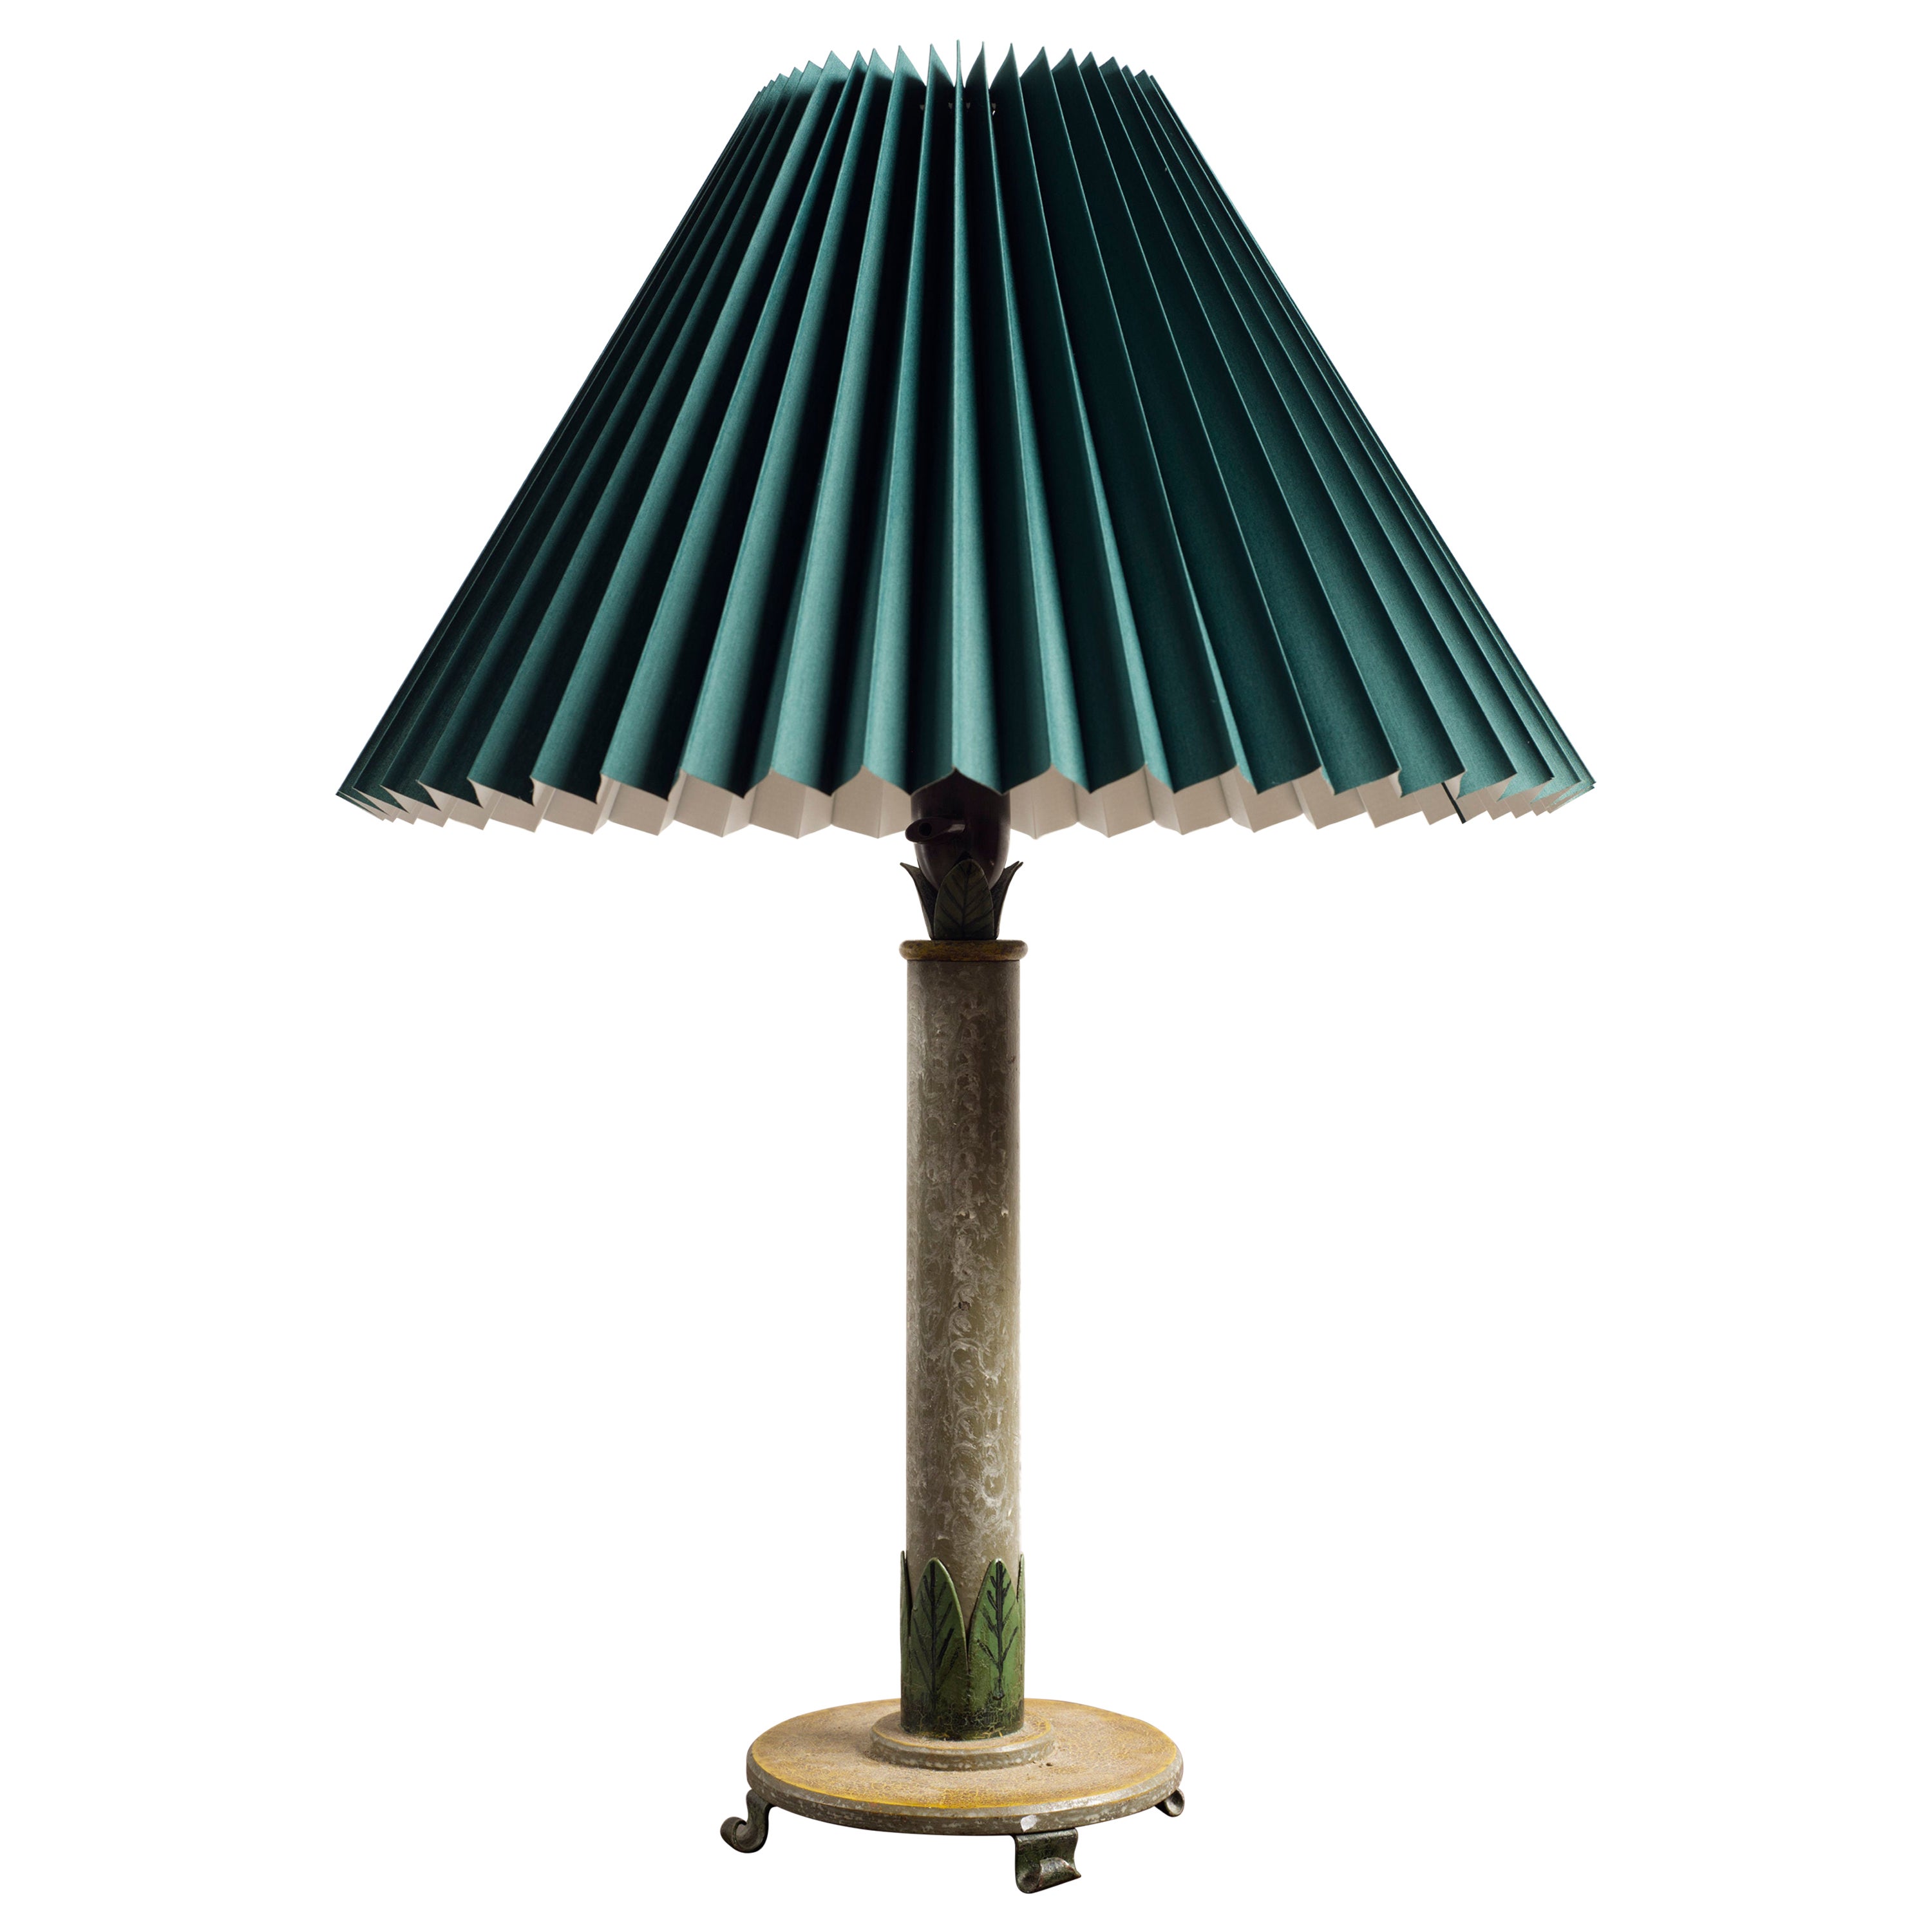 What is a softback lamp shade?